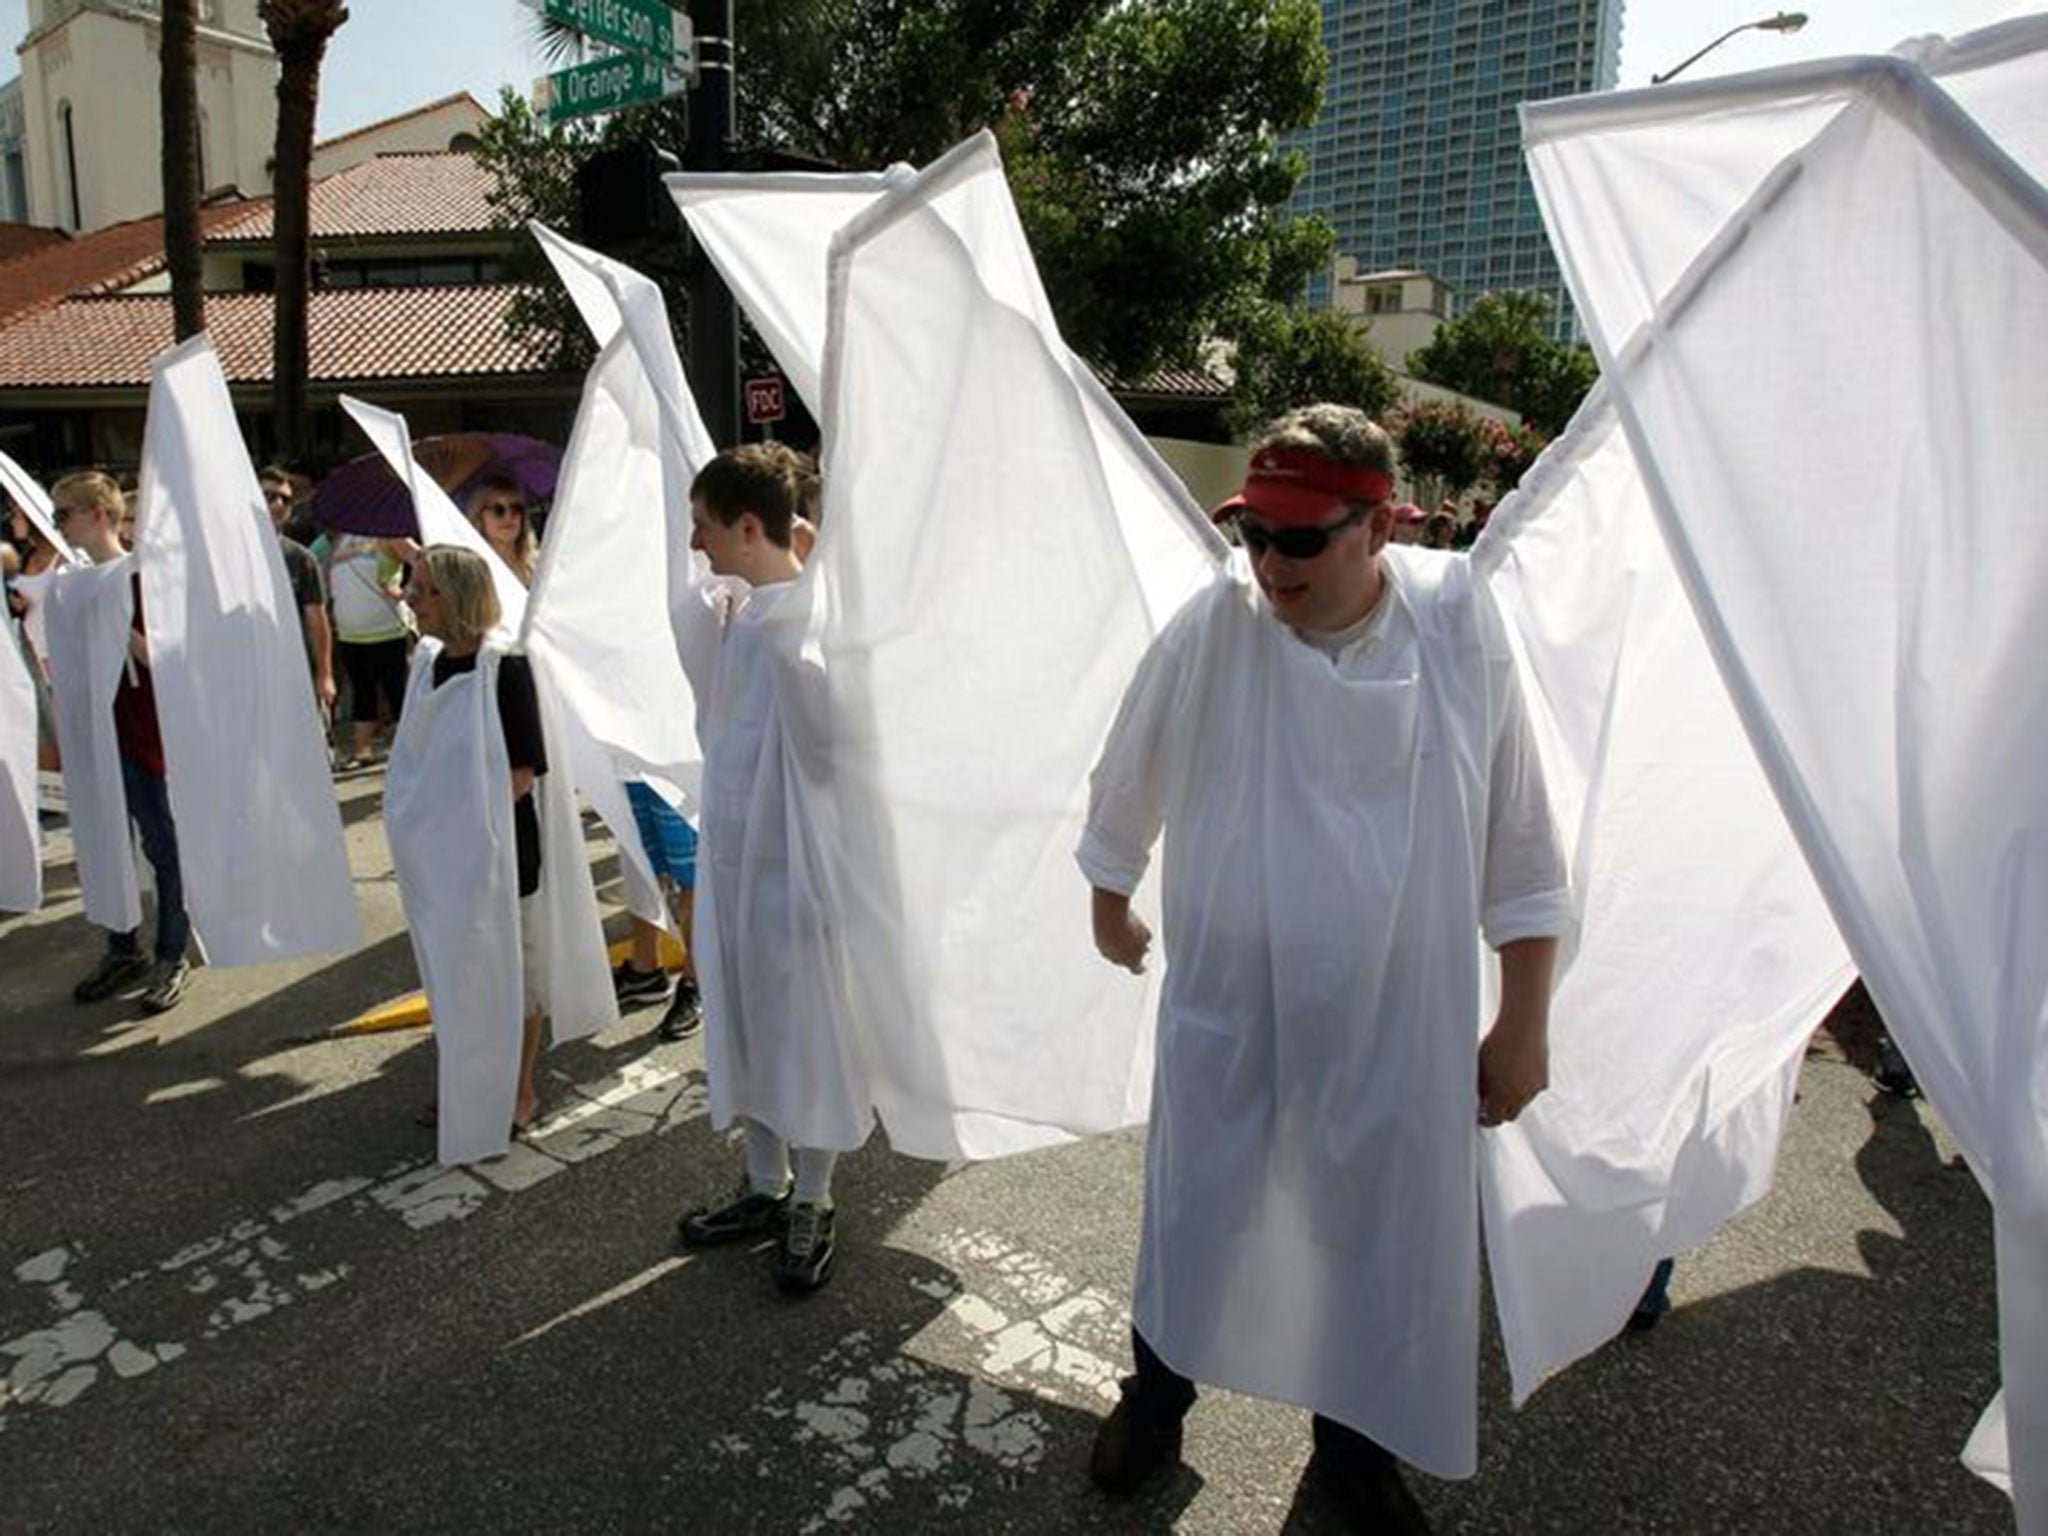 The 'angels' wore large wings to block out protestors at the funerals of victims of the Orlando shootings